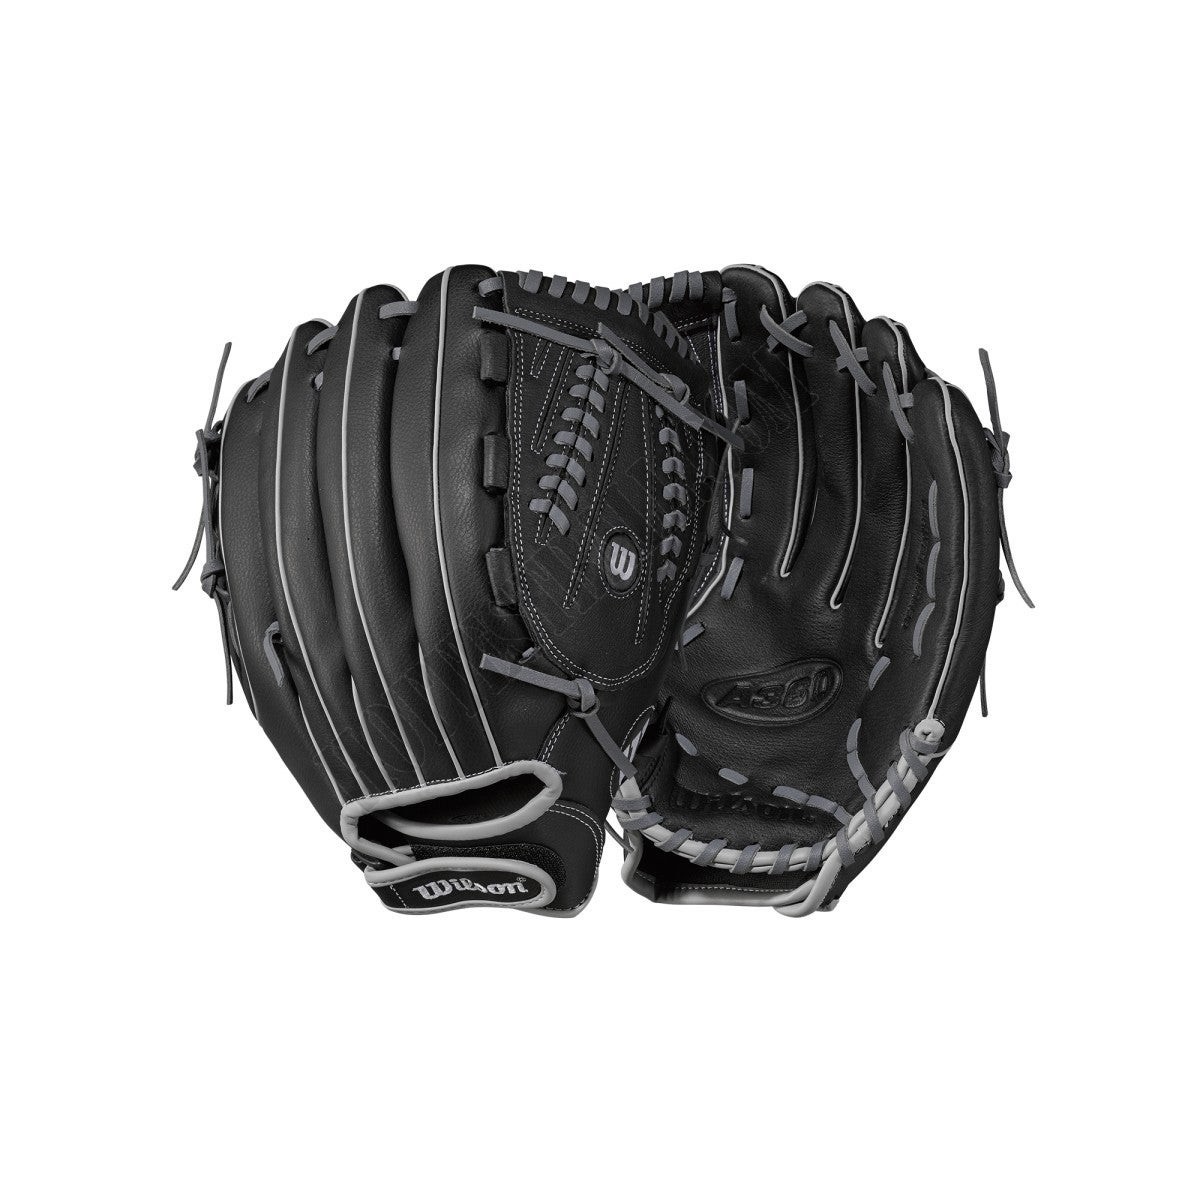 A360 13" Slowpitch Glove - Right Hand Throw ● Wilson Promotions - A360 13" Slowpitch Glove - Right Hand Throw ● Wilson Promotions